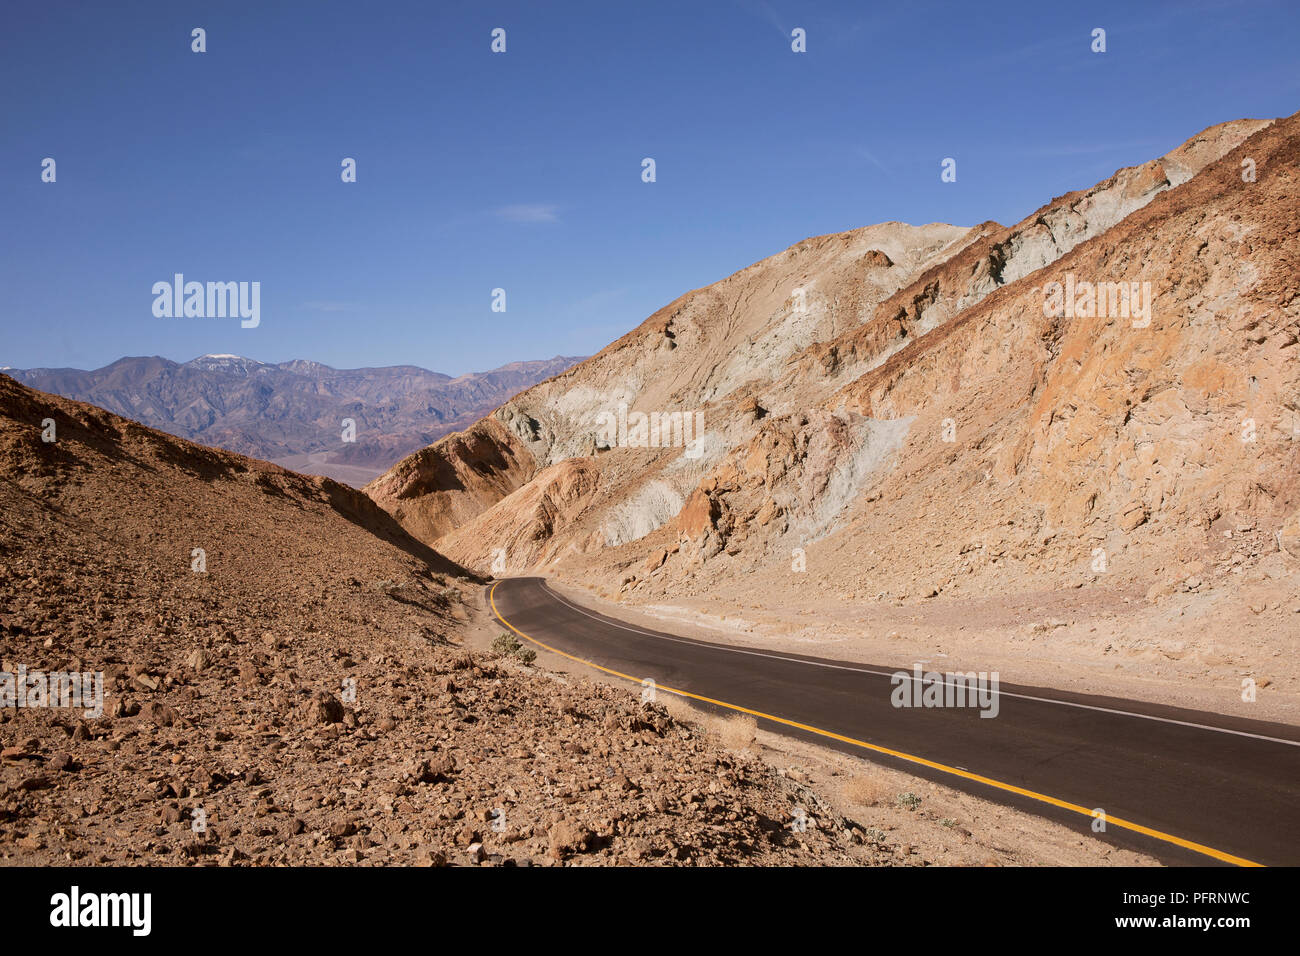 USA, California, Death Valley, new road through arid landscape at Artist's Palette with blue sky above Stock Photo